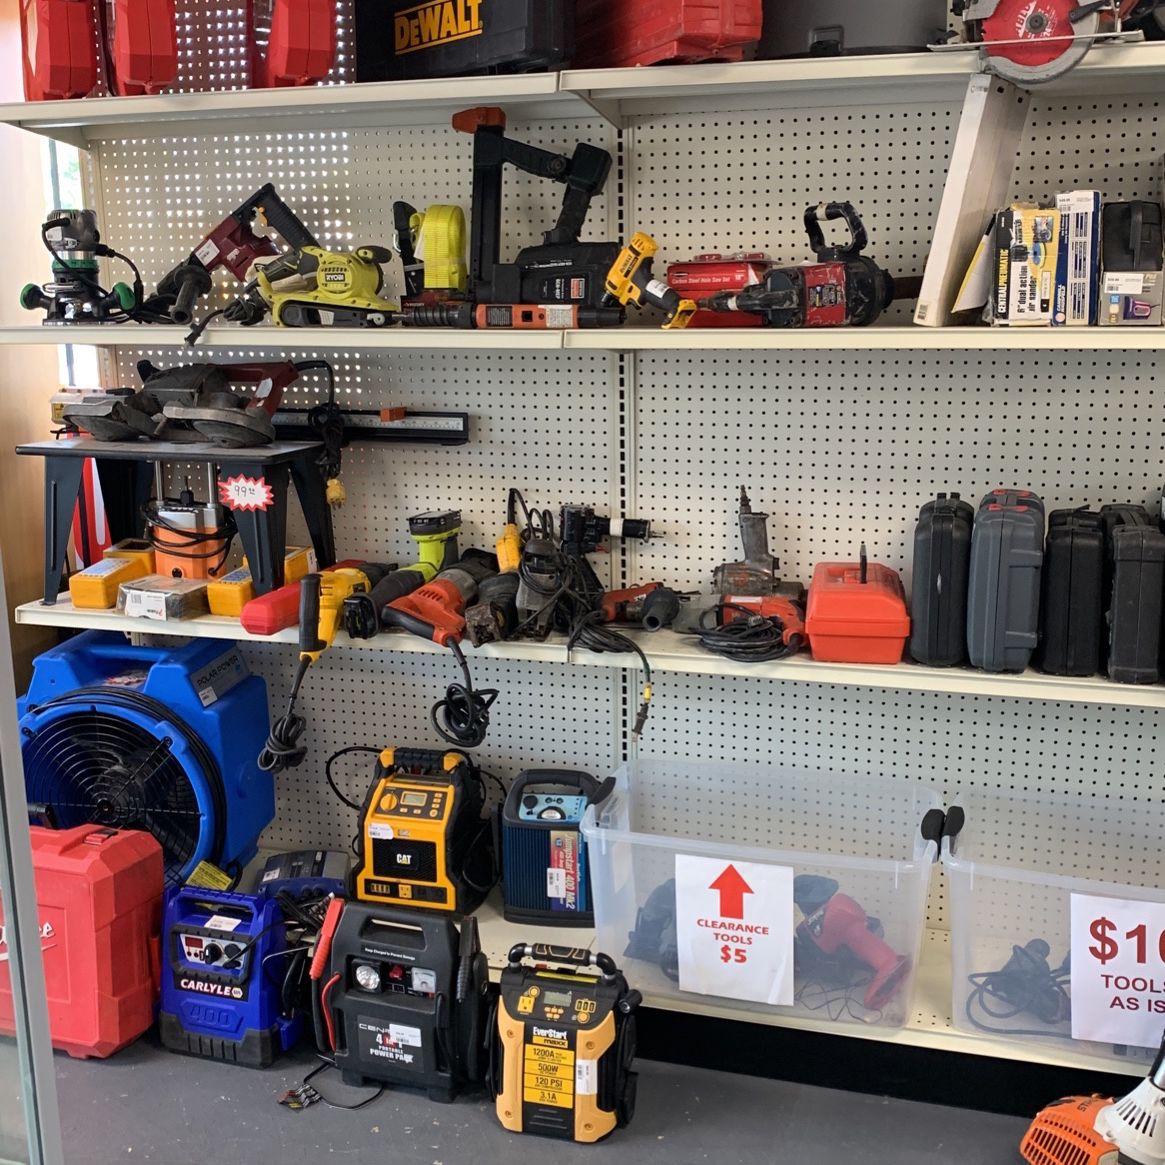 Clearance Tools